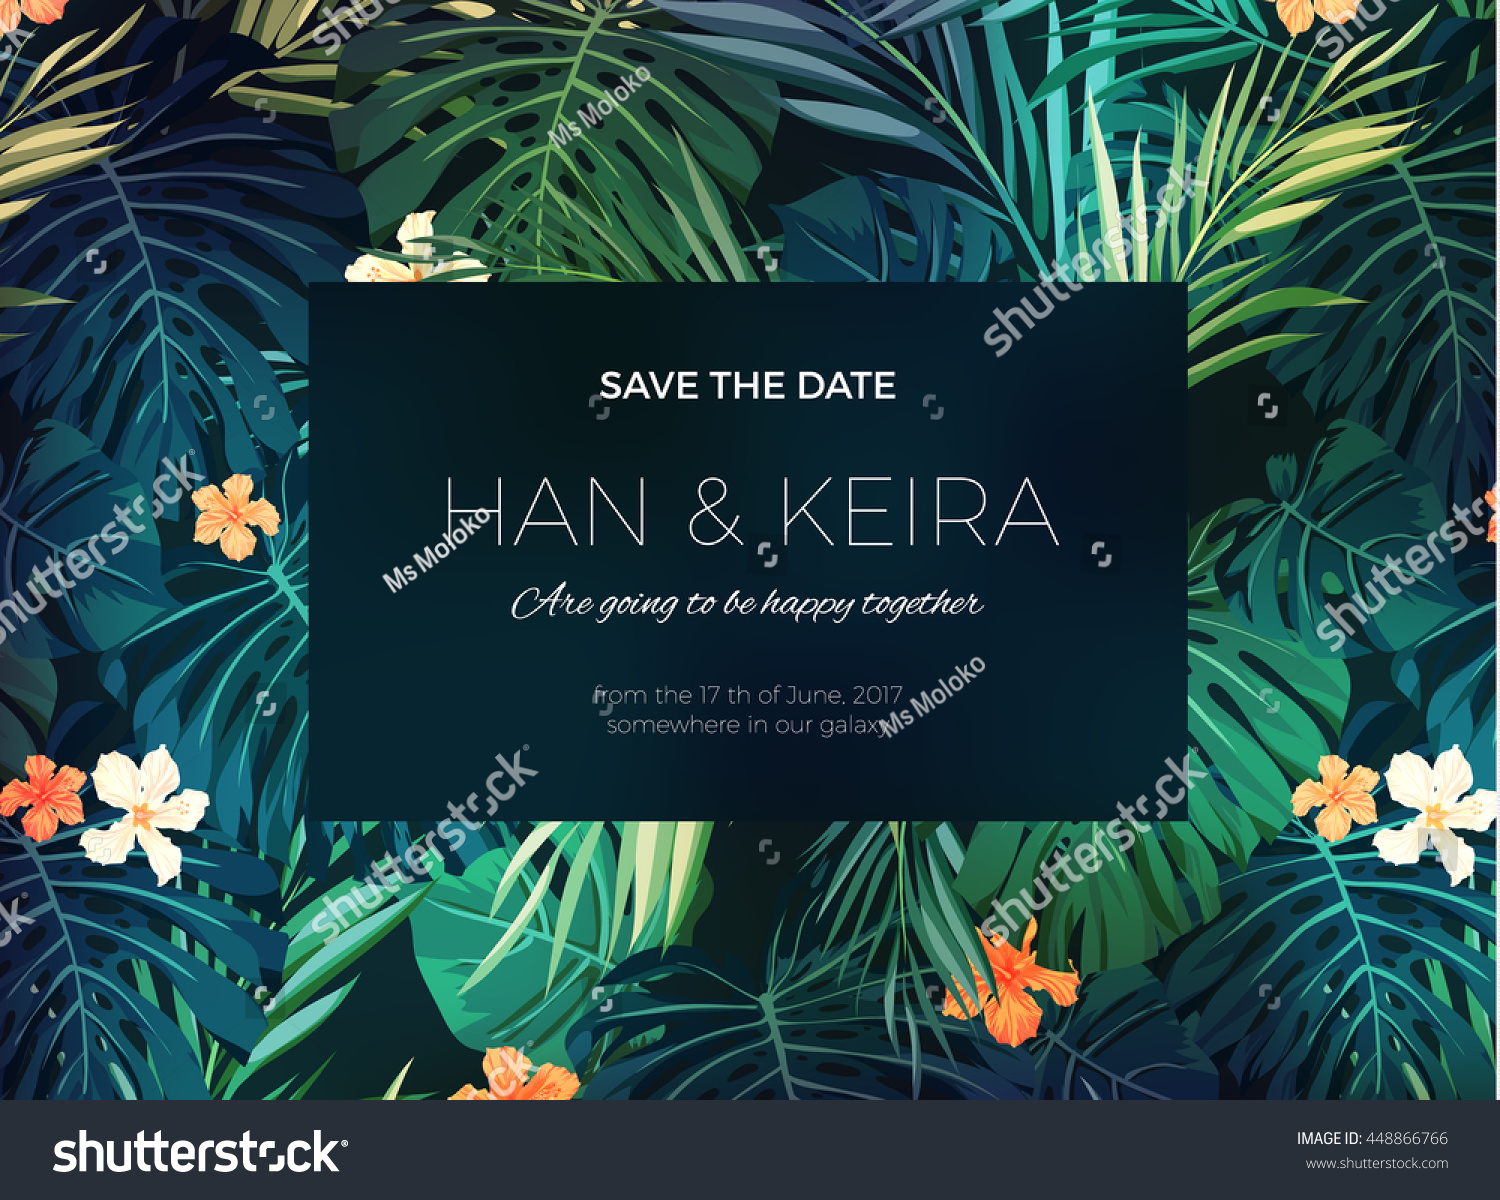 Wedding invitation or card design with exotic tropical flowers and leaves #448866766